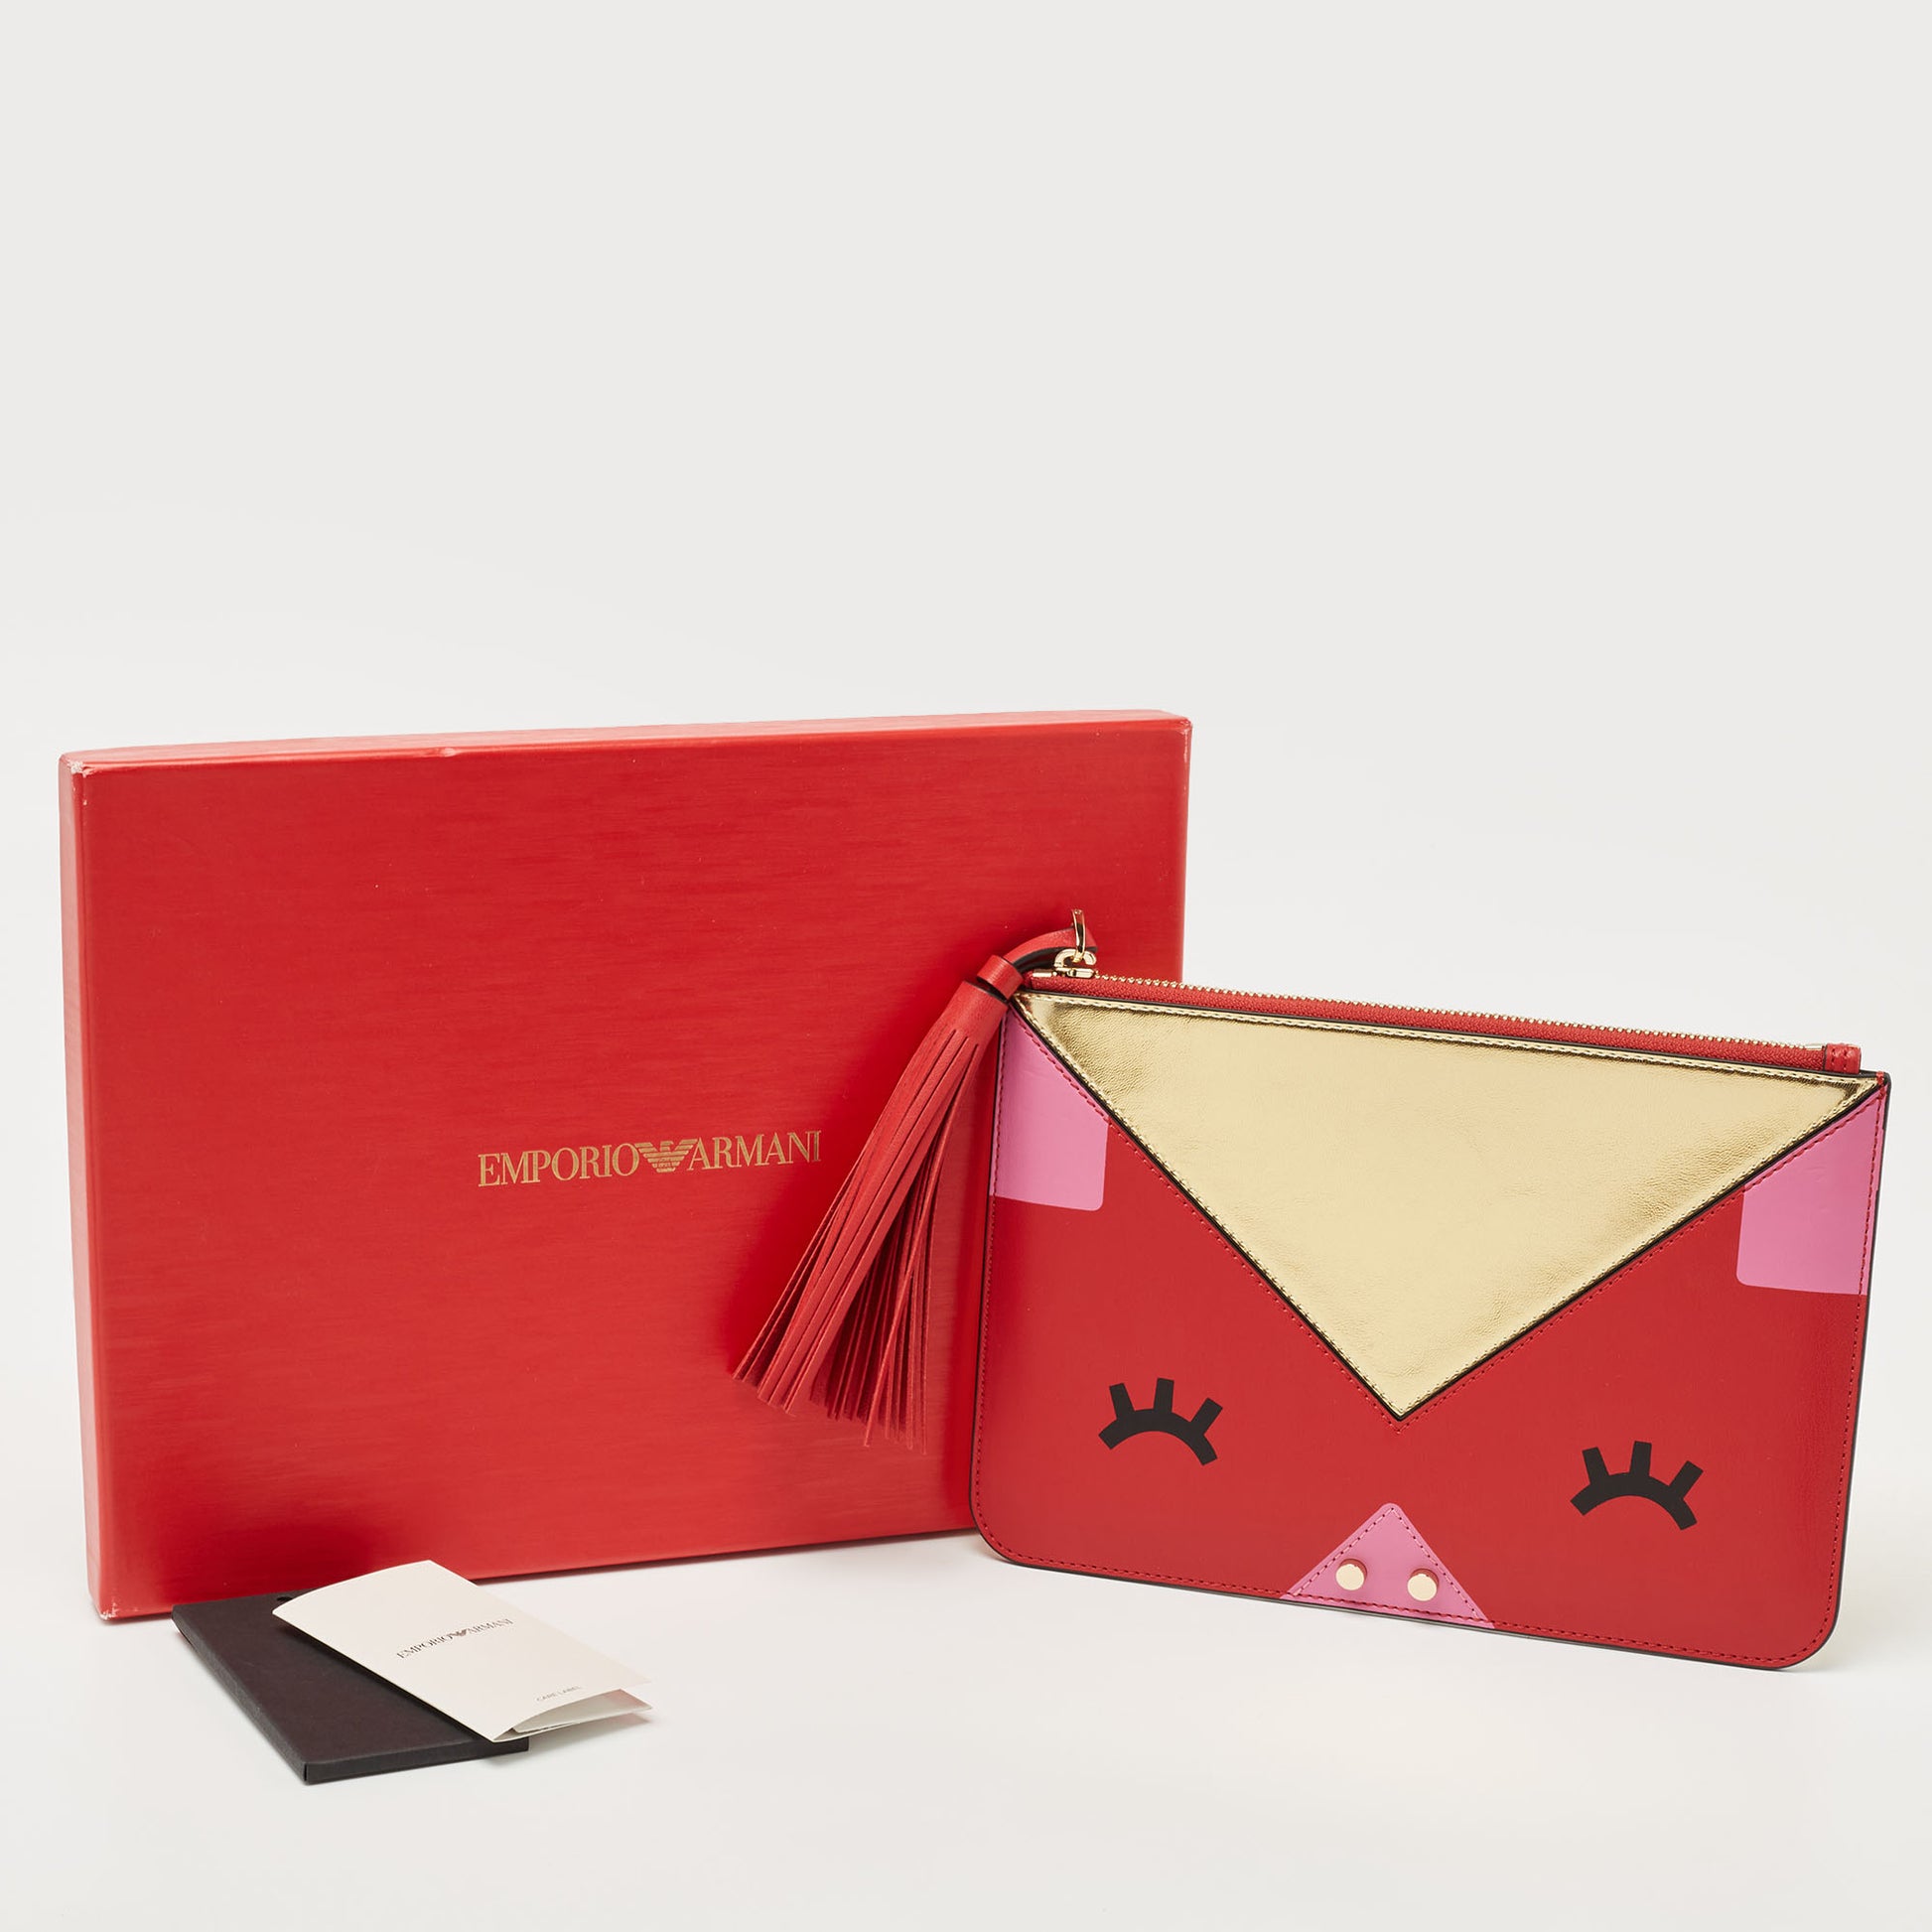 EMPORIO ARMANI Red/Gold Leather Pig Tassel Clutch